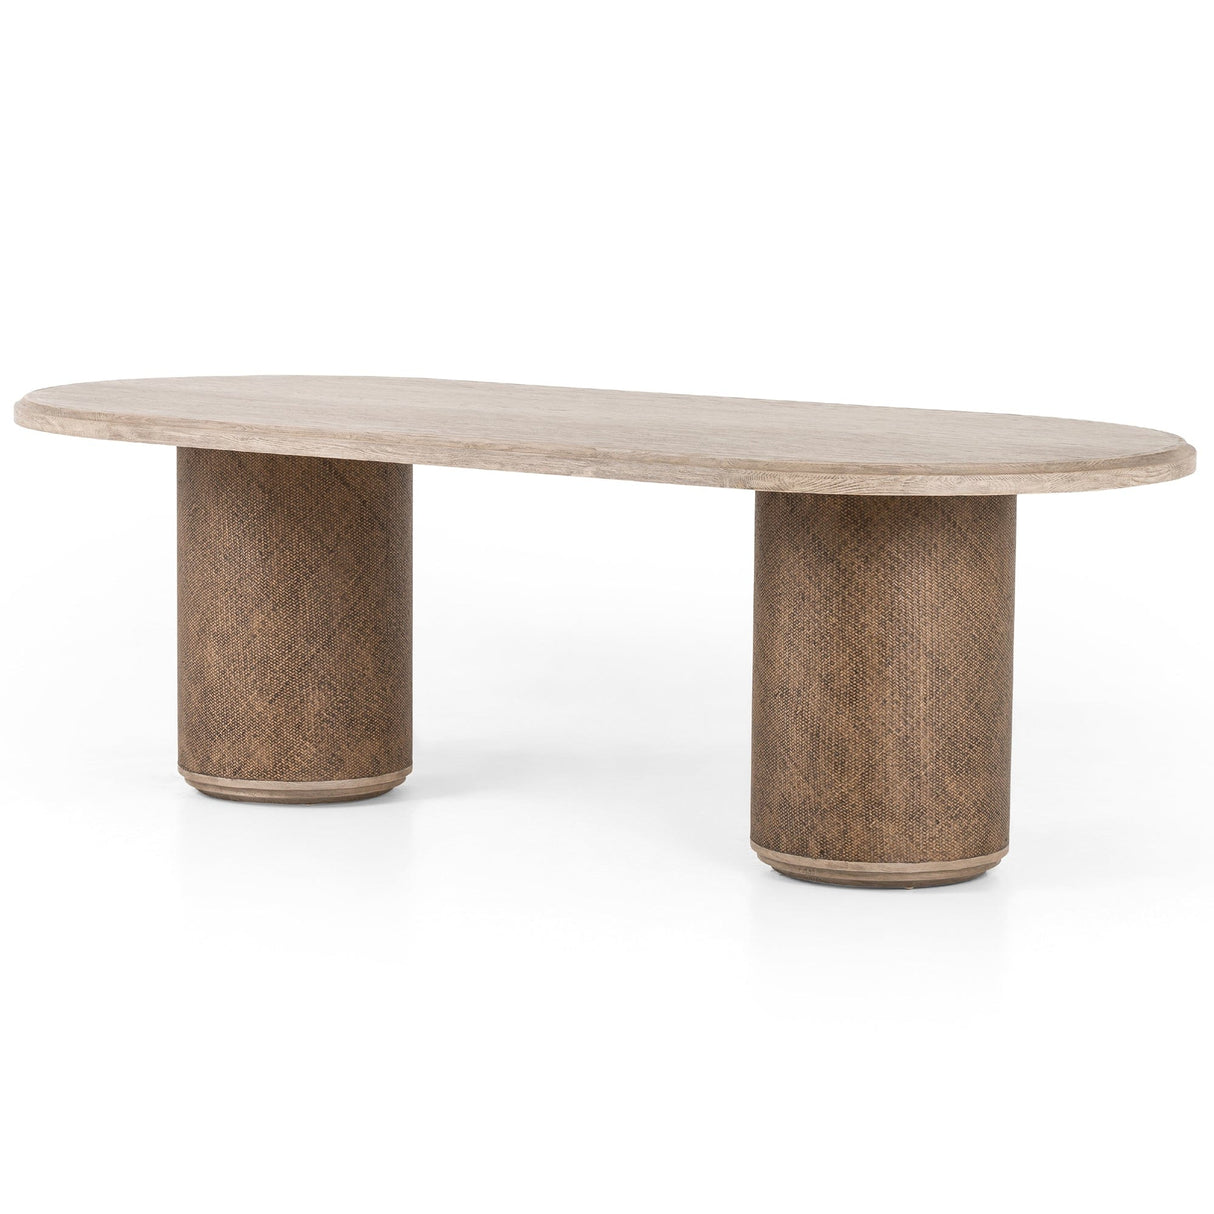 Four Hands Kiara Dining Table Furniture four-hands-228000-003 801542802363